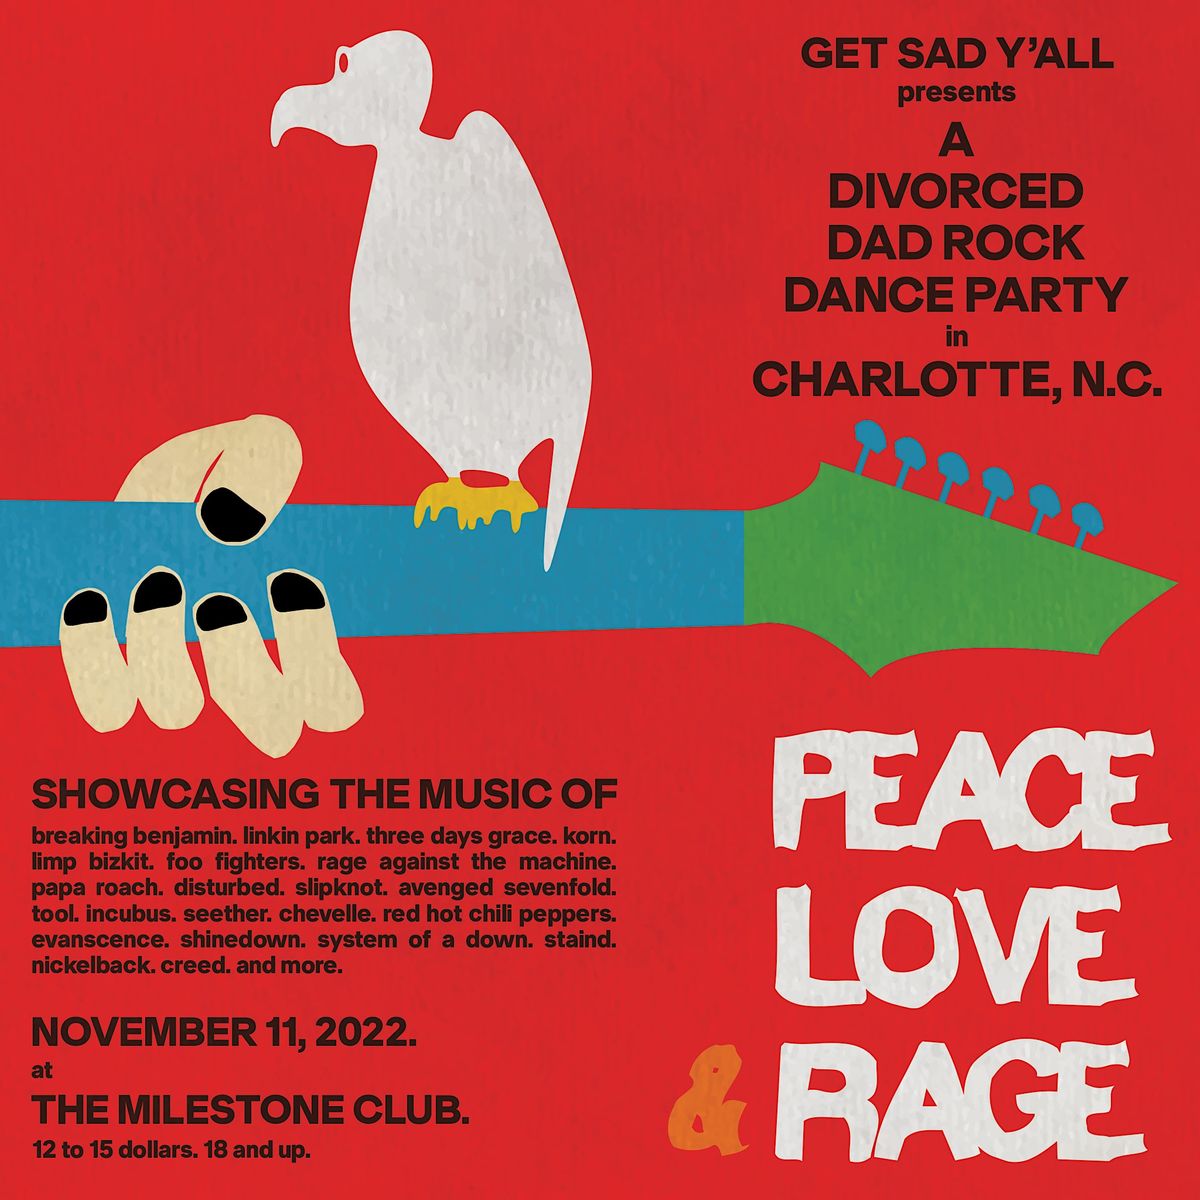 PEACE LOVE & RAGE: A DIVORCED DAD ROCK DANCE PARTY @ THE MILESTONE 11\/11\/22